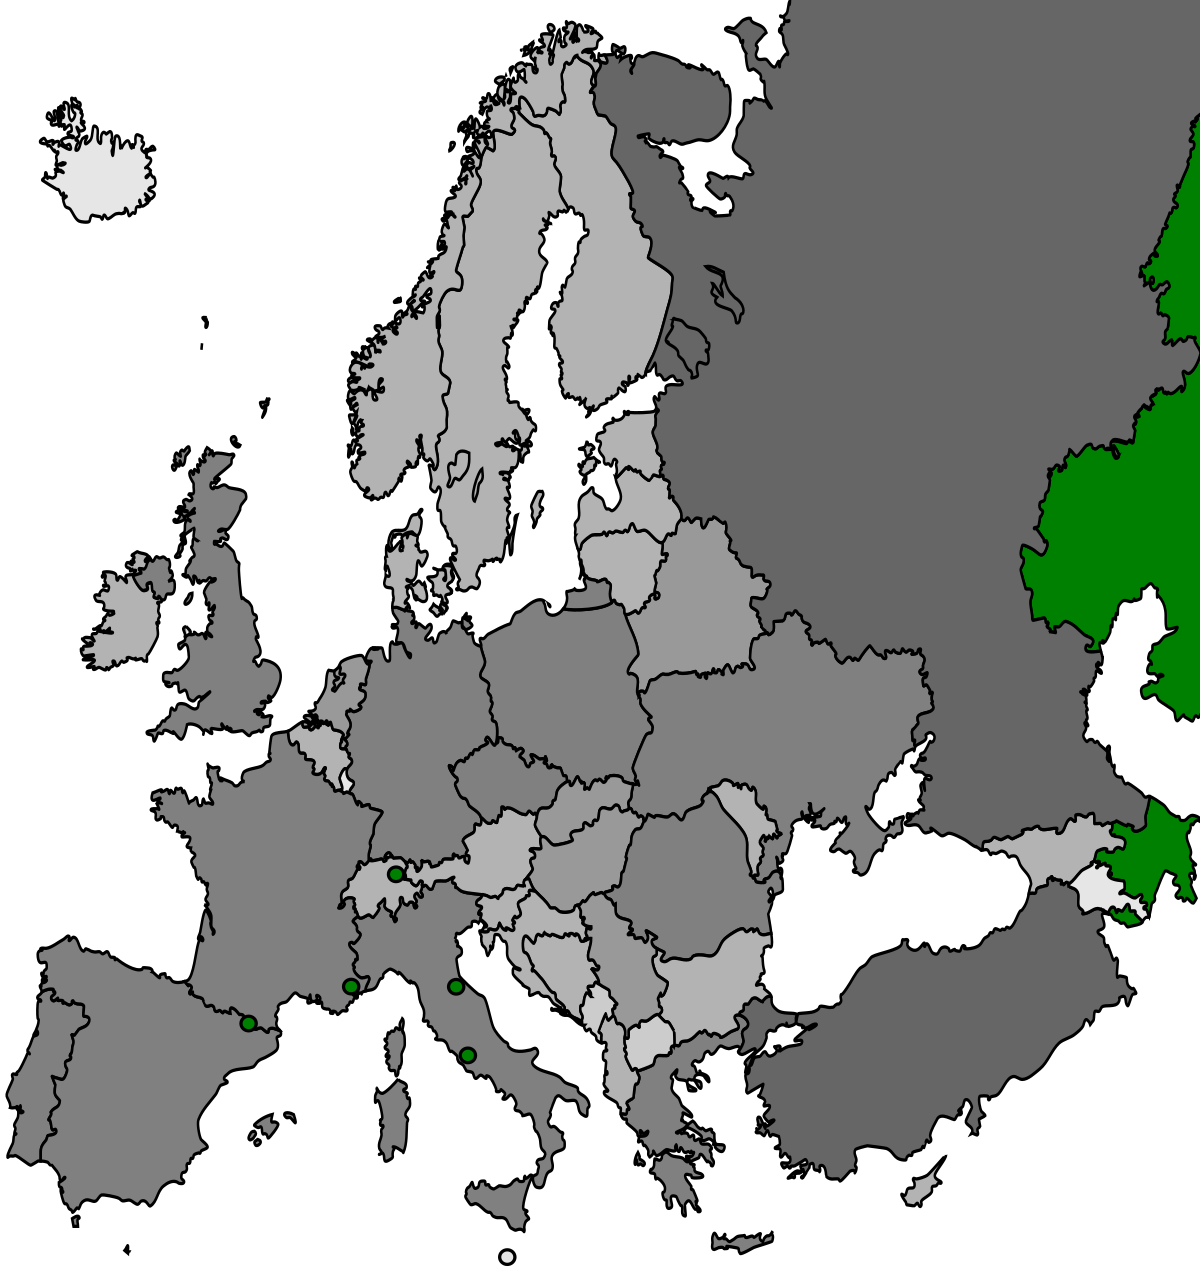 Карты 2009 года. Map of Europe without names. Europe 2009.